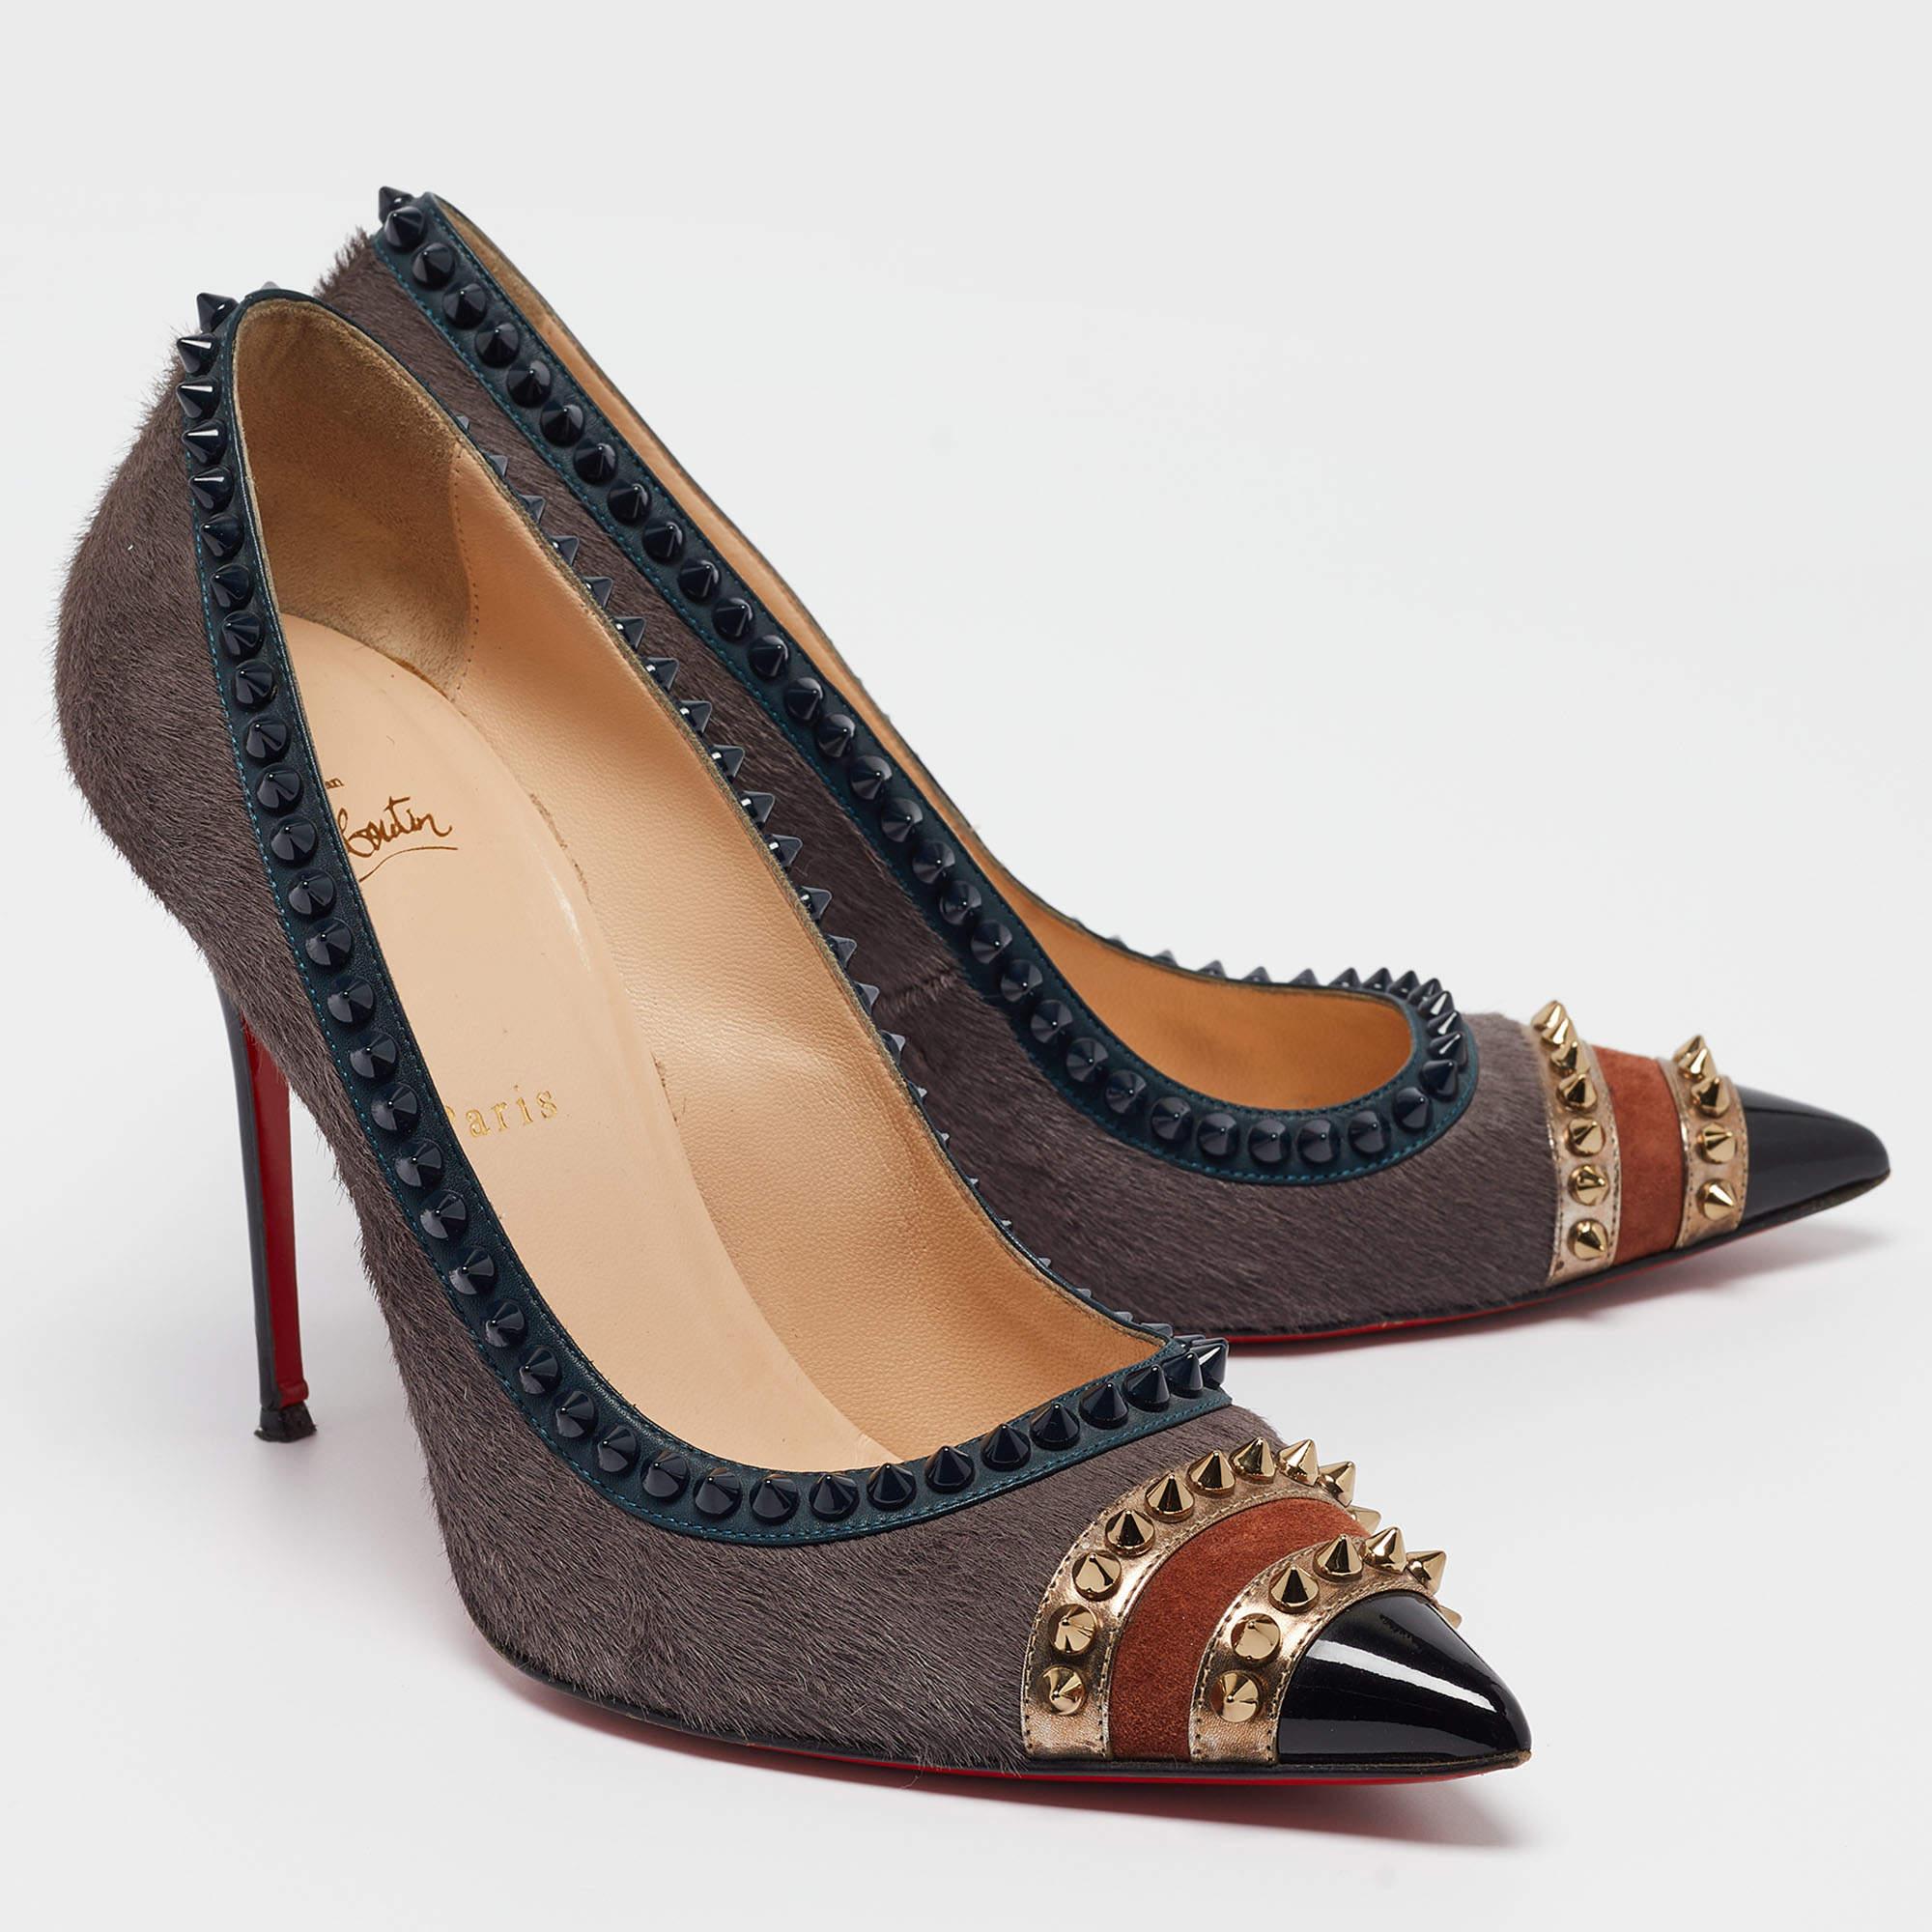 Christian Louboutin Multicolor Calf Hair and Leather Malabar Hill Spiked Pointed In Good Condition For Sale In Dubai, Al Qouz 2